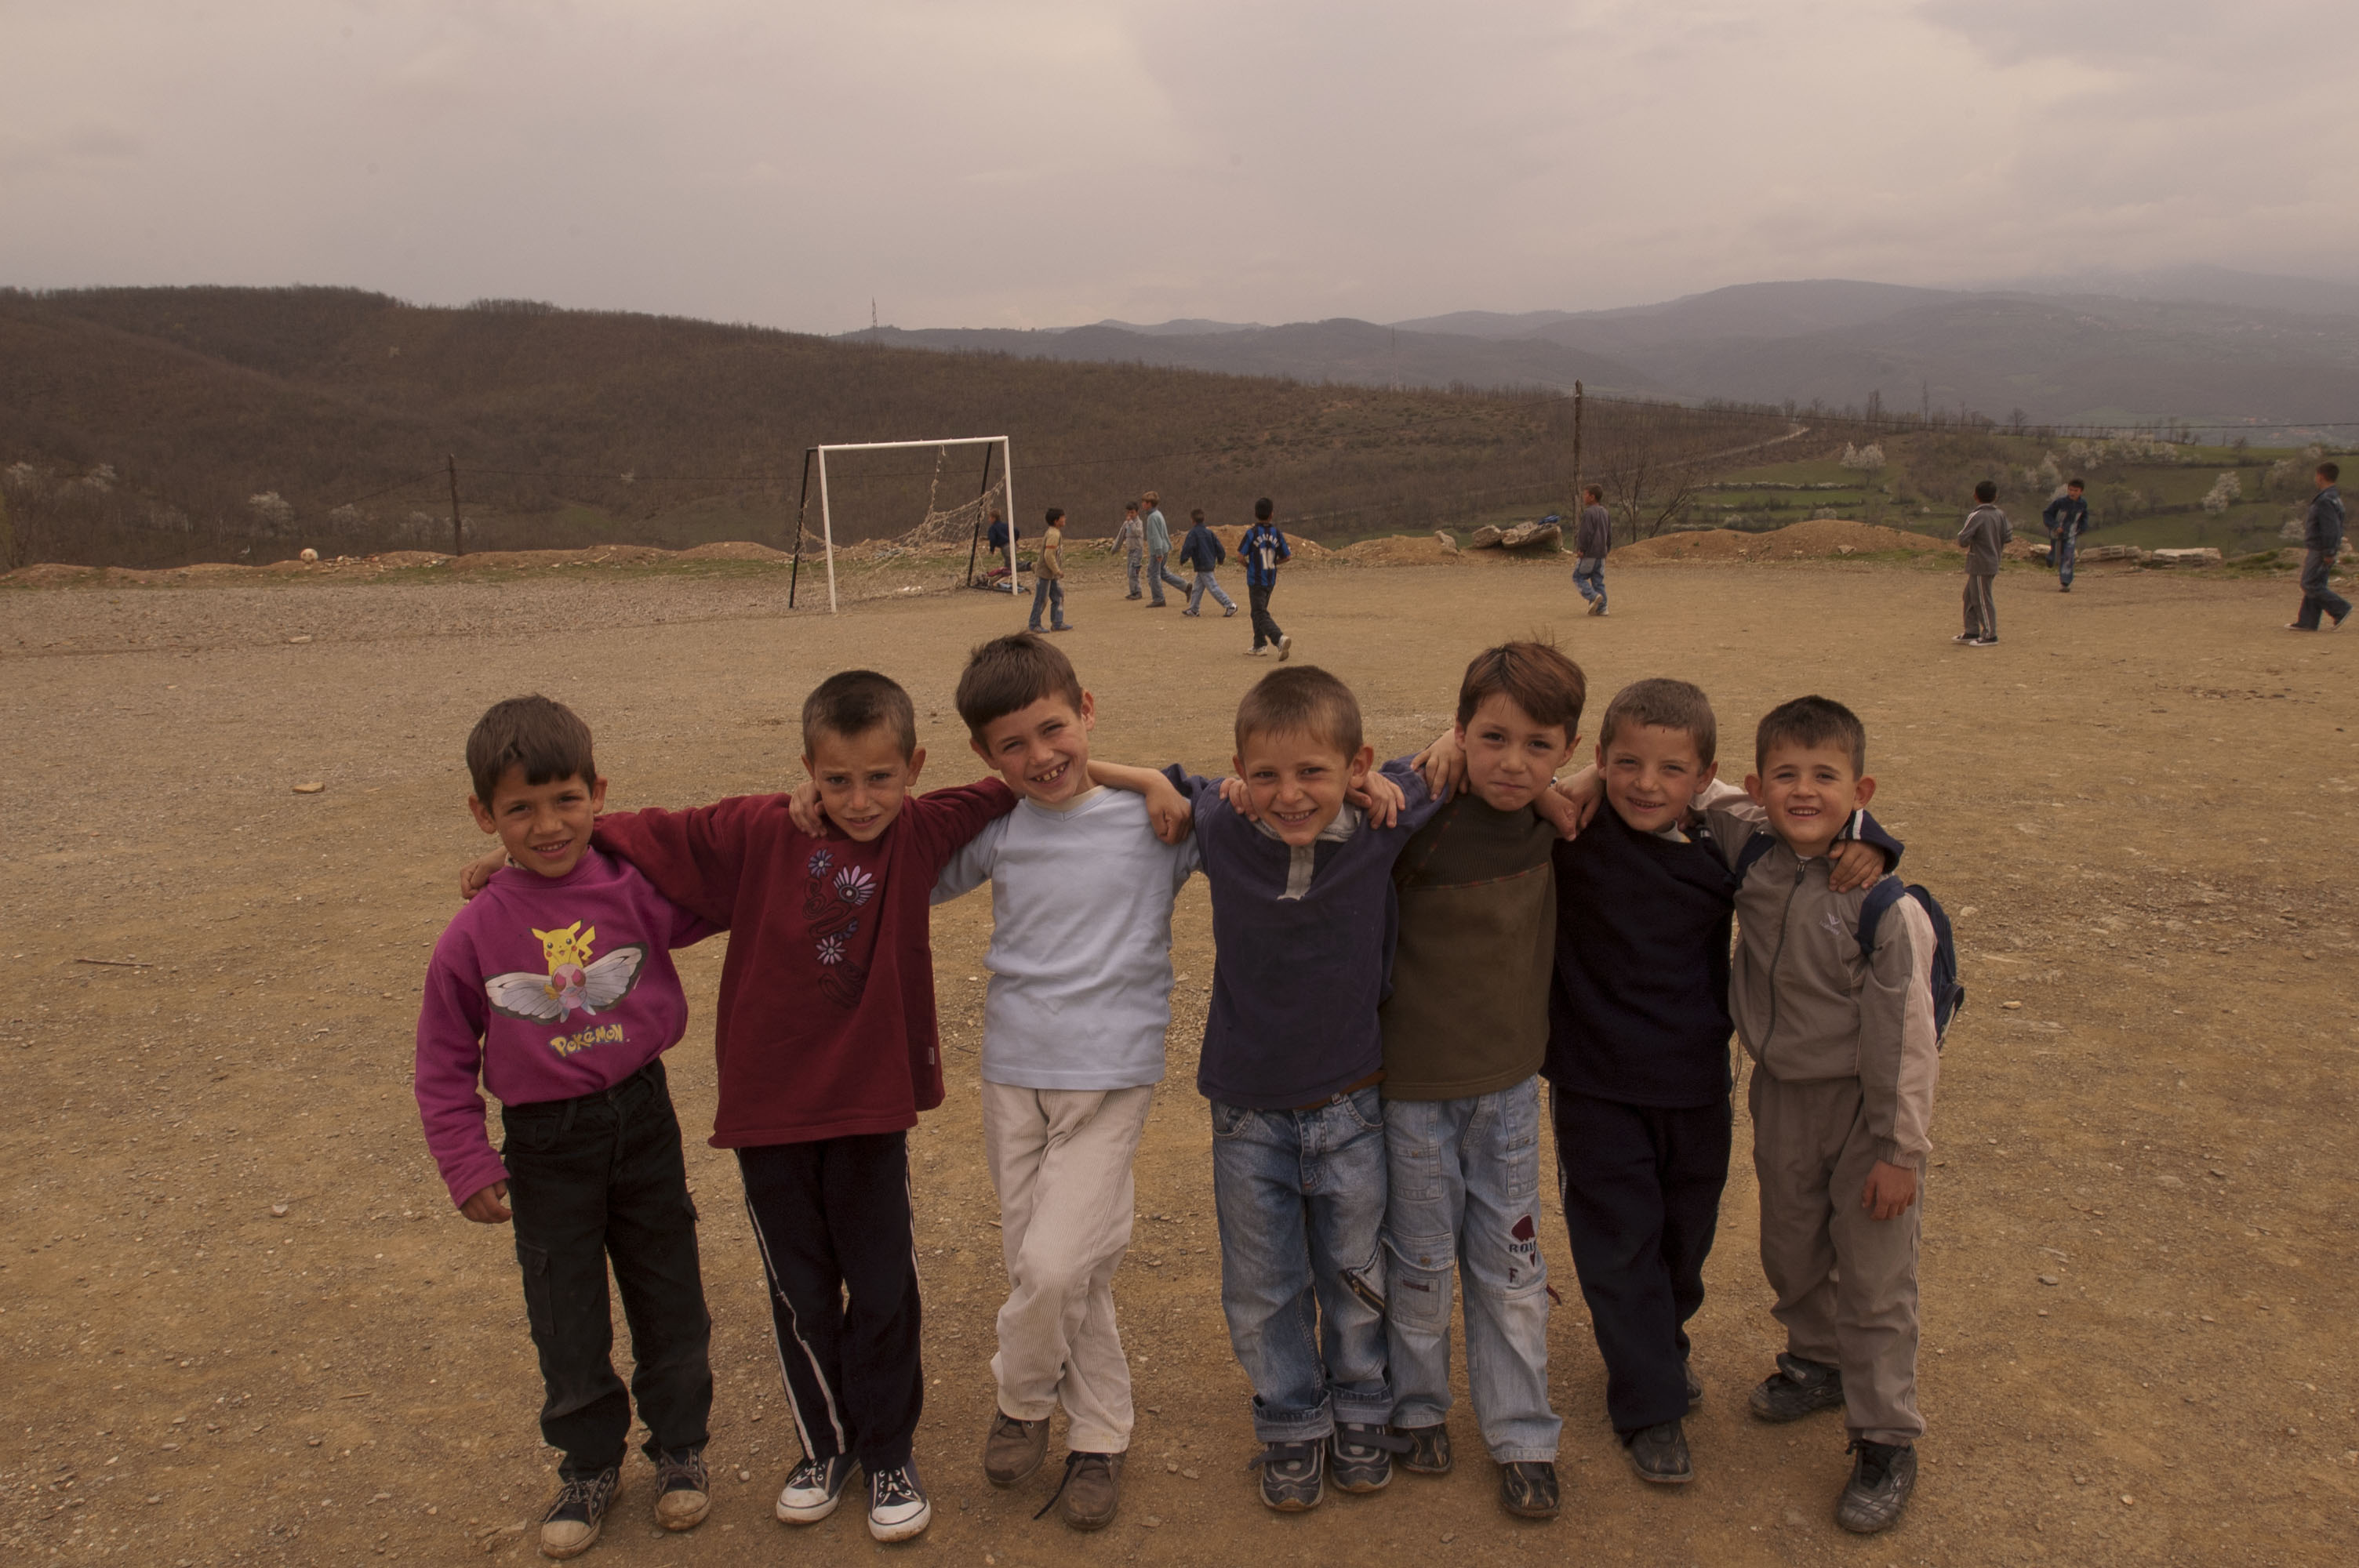 Seven young students stand at the camera smiling, with their arms around each other’s shoulders. They are standing in a dirt soccer field, and there are young boys playing behind them near a soccer goal. There are mountains in the backdrop.